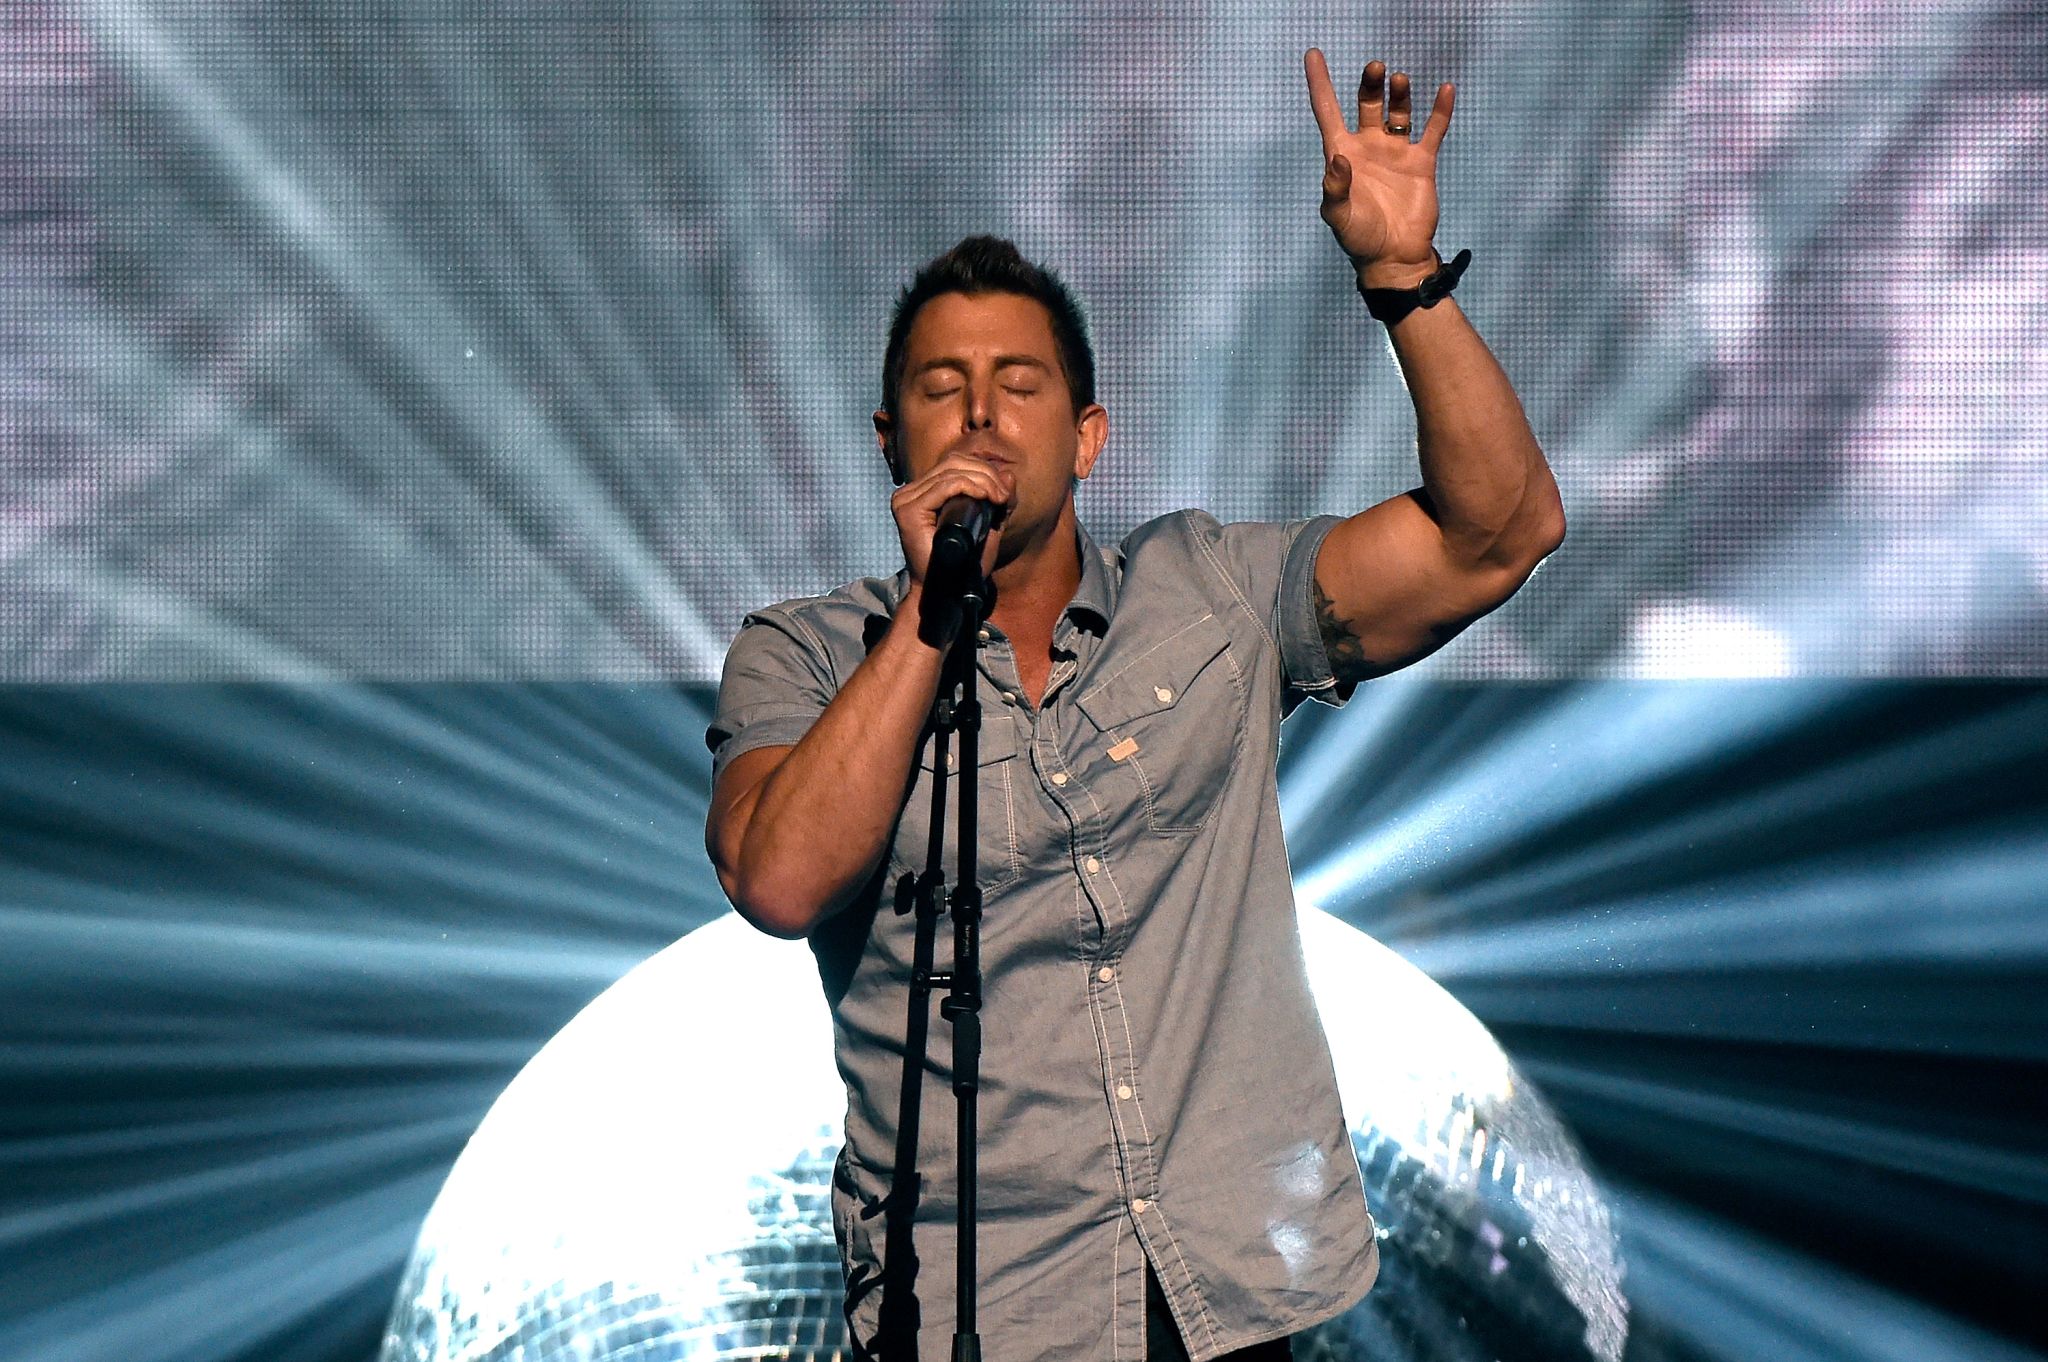 Jeremy Camp Hits The Road As New ‘Christ In Me’ Music Video Launches